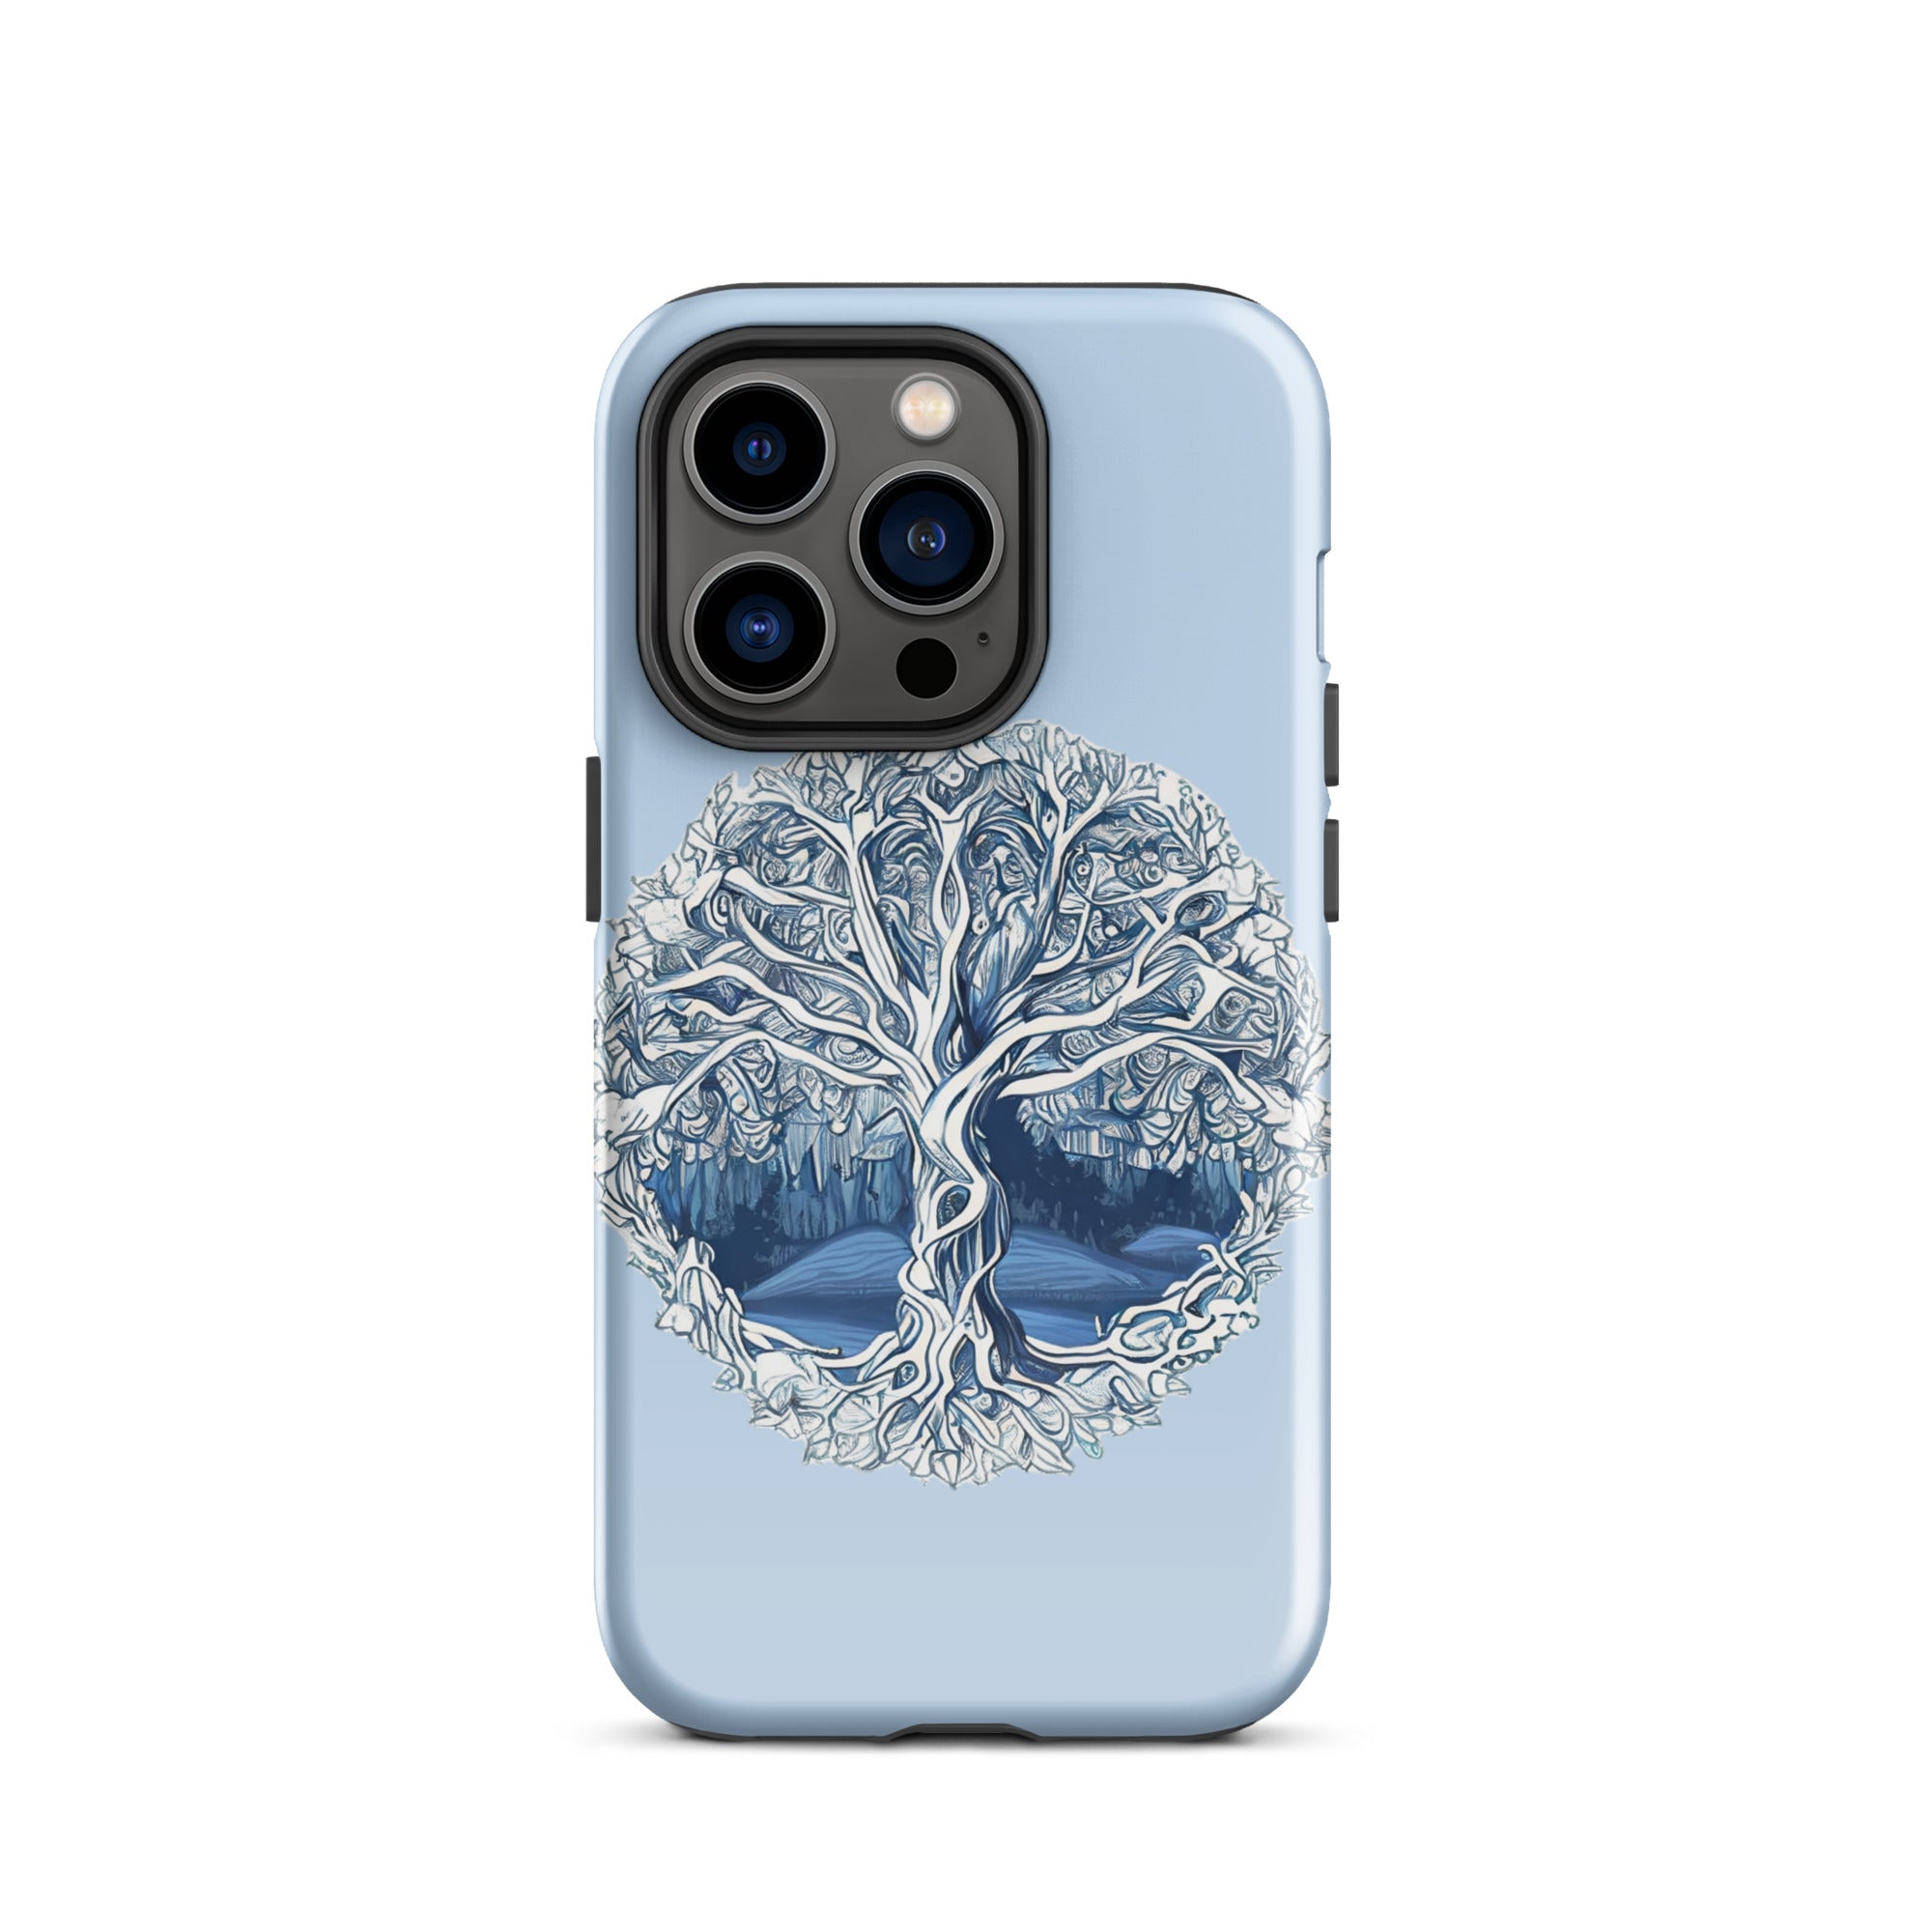 tough-case-for-iphone-glossy-iphone-14-pro-front-656e0a3713415.jpg